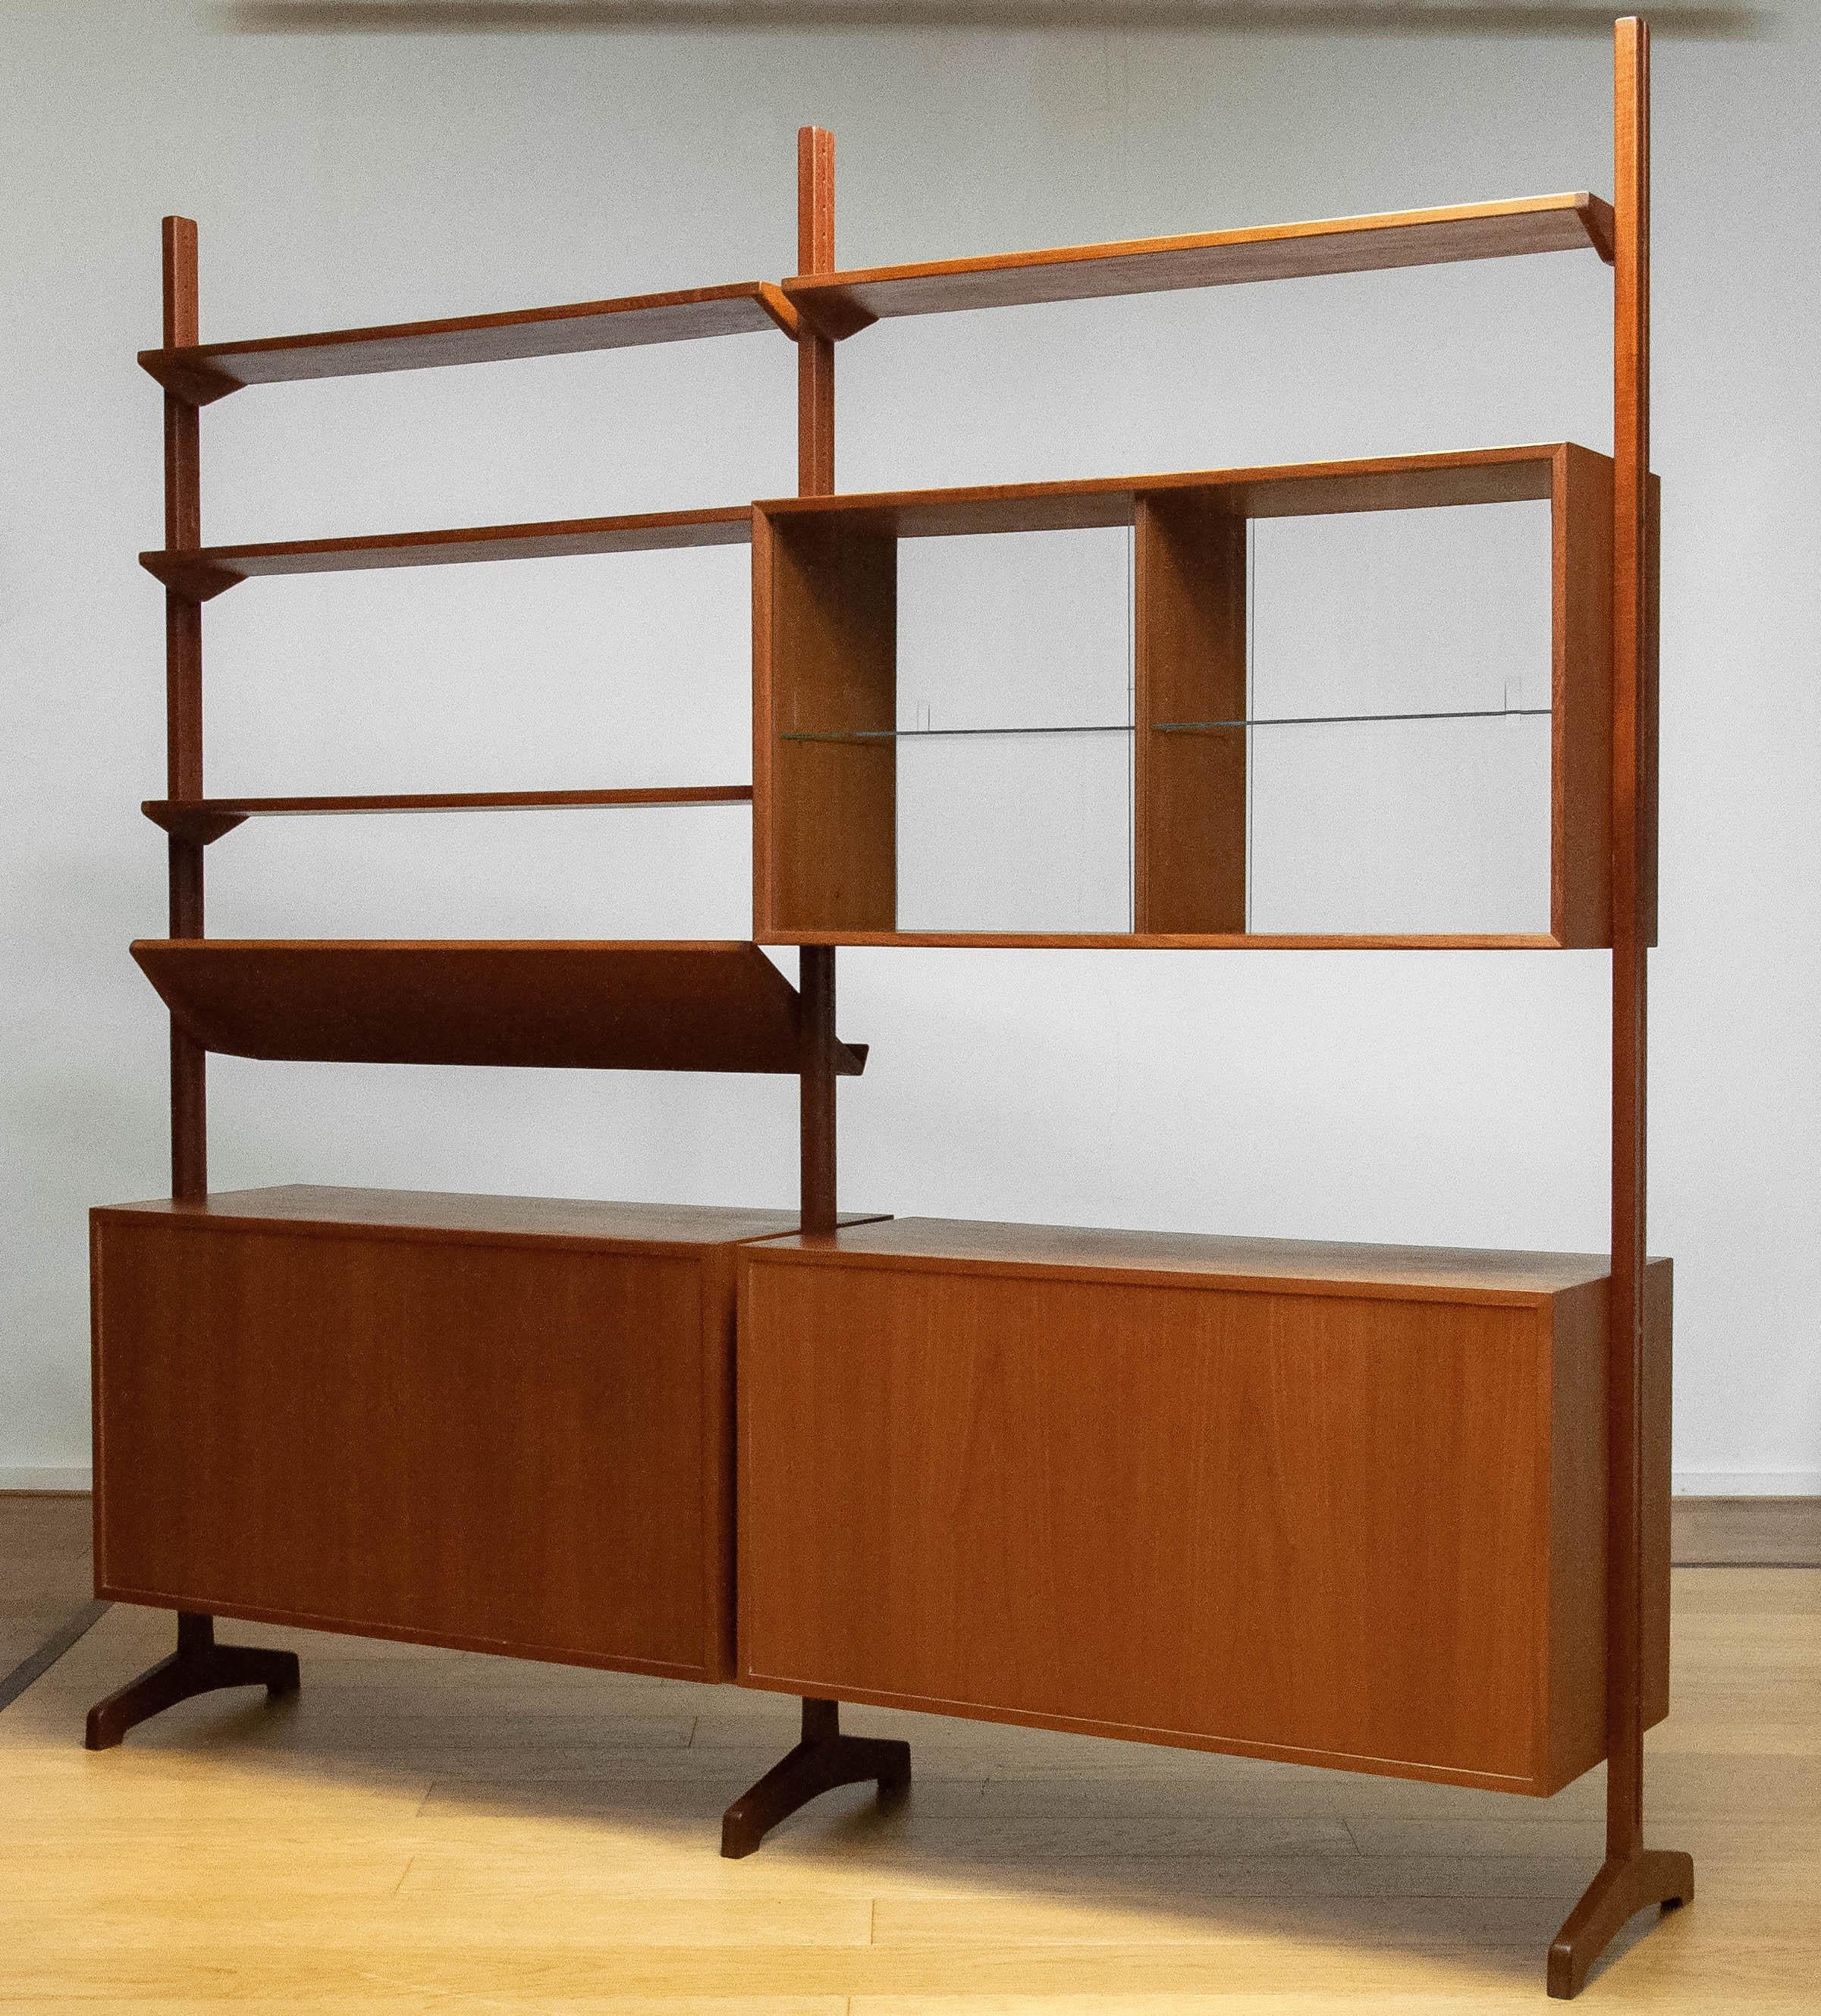 Mid-20th Century 1950s Teak Bookcase Shelf Cabinet / Room divider By Nils Jonsson For Troeds. For Sale